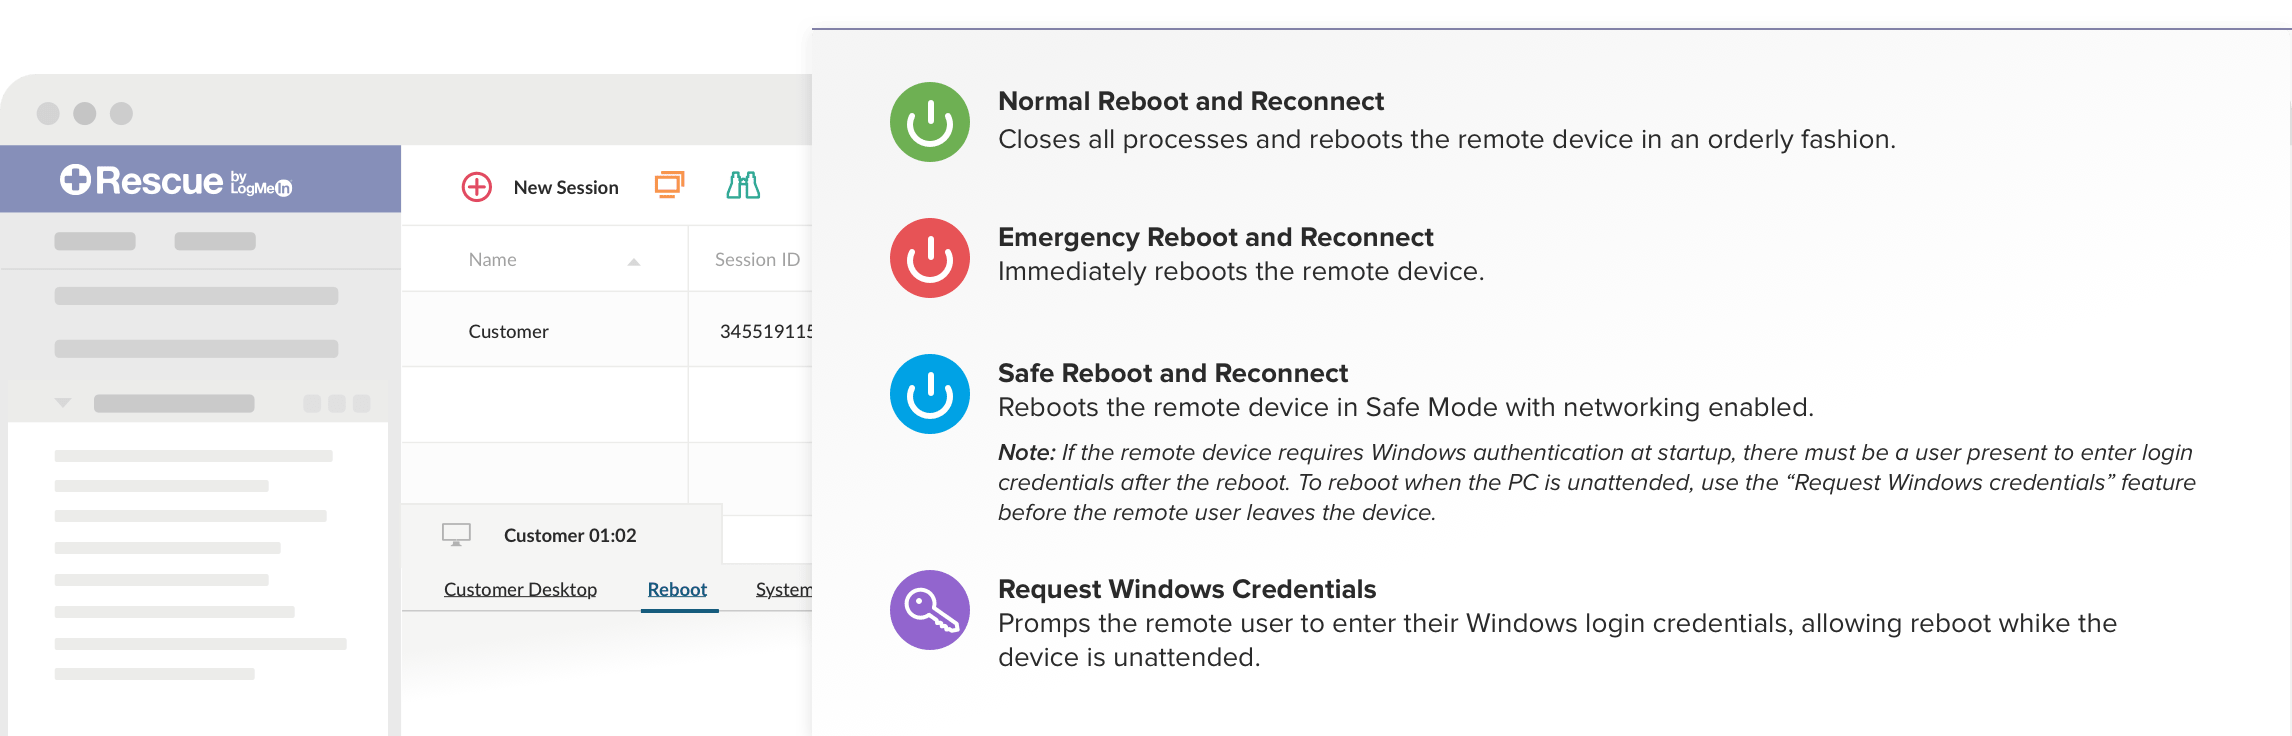 Options to reboot and reconnect when troubleshooting.